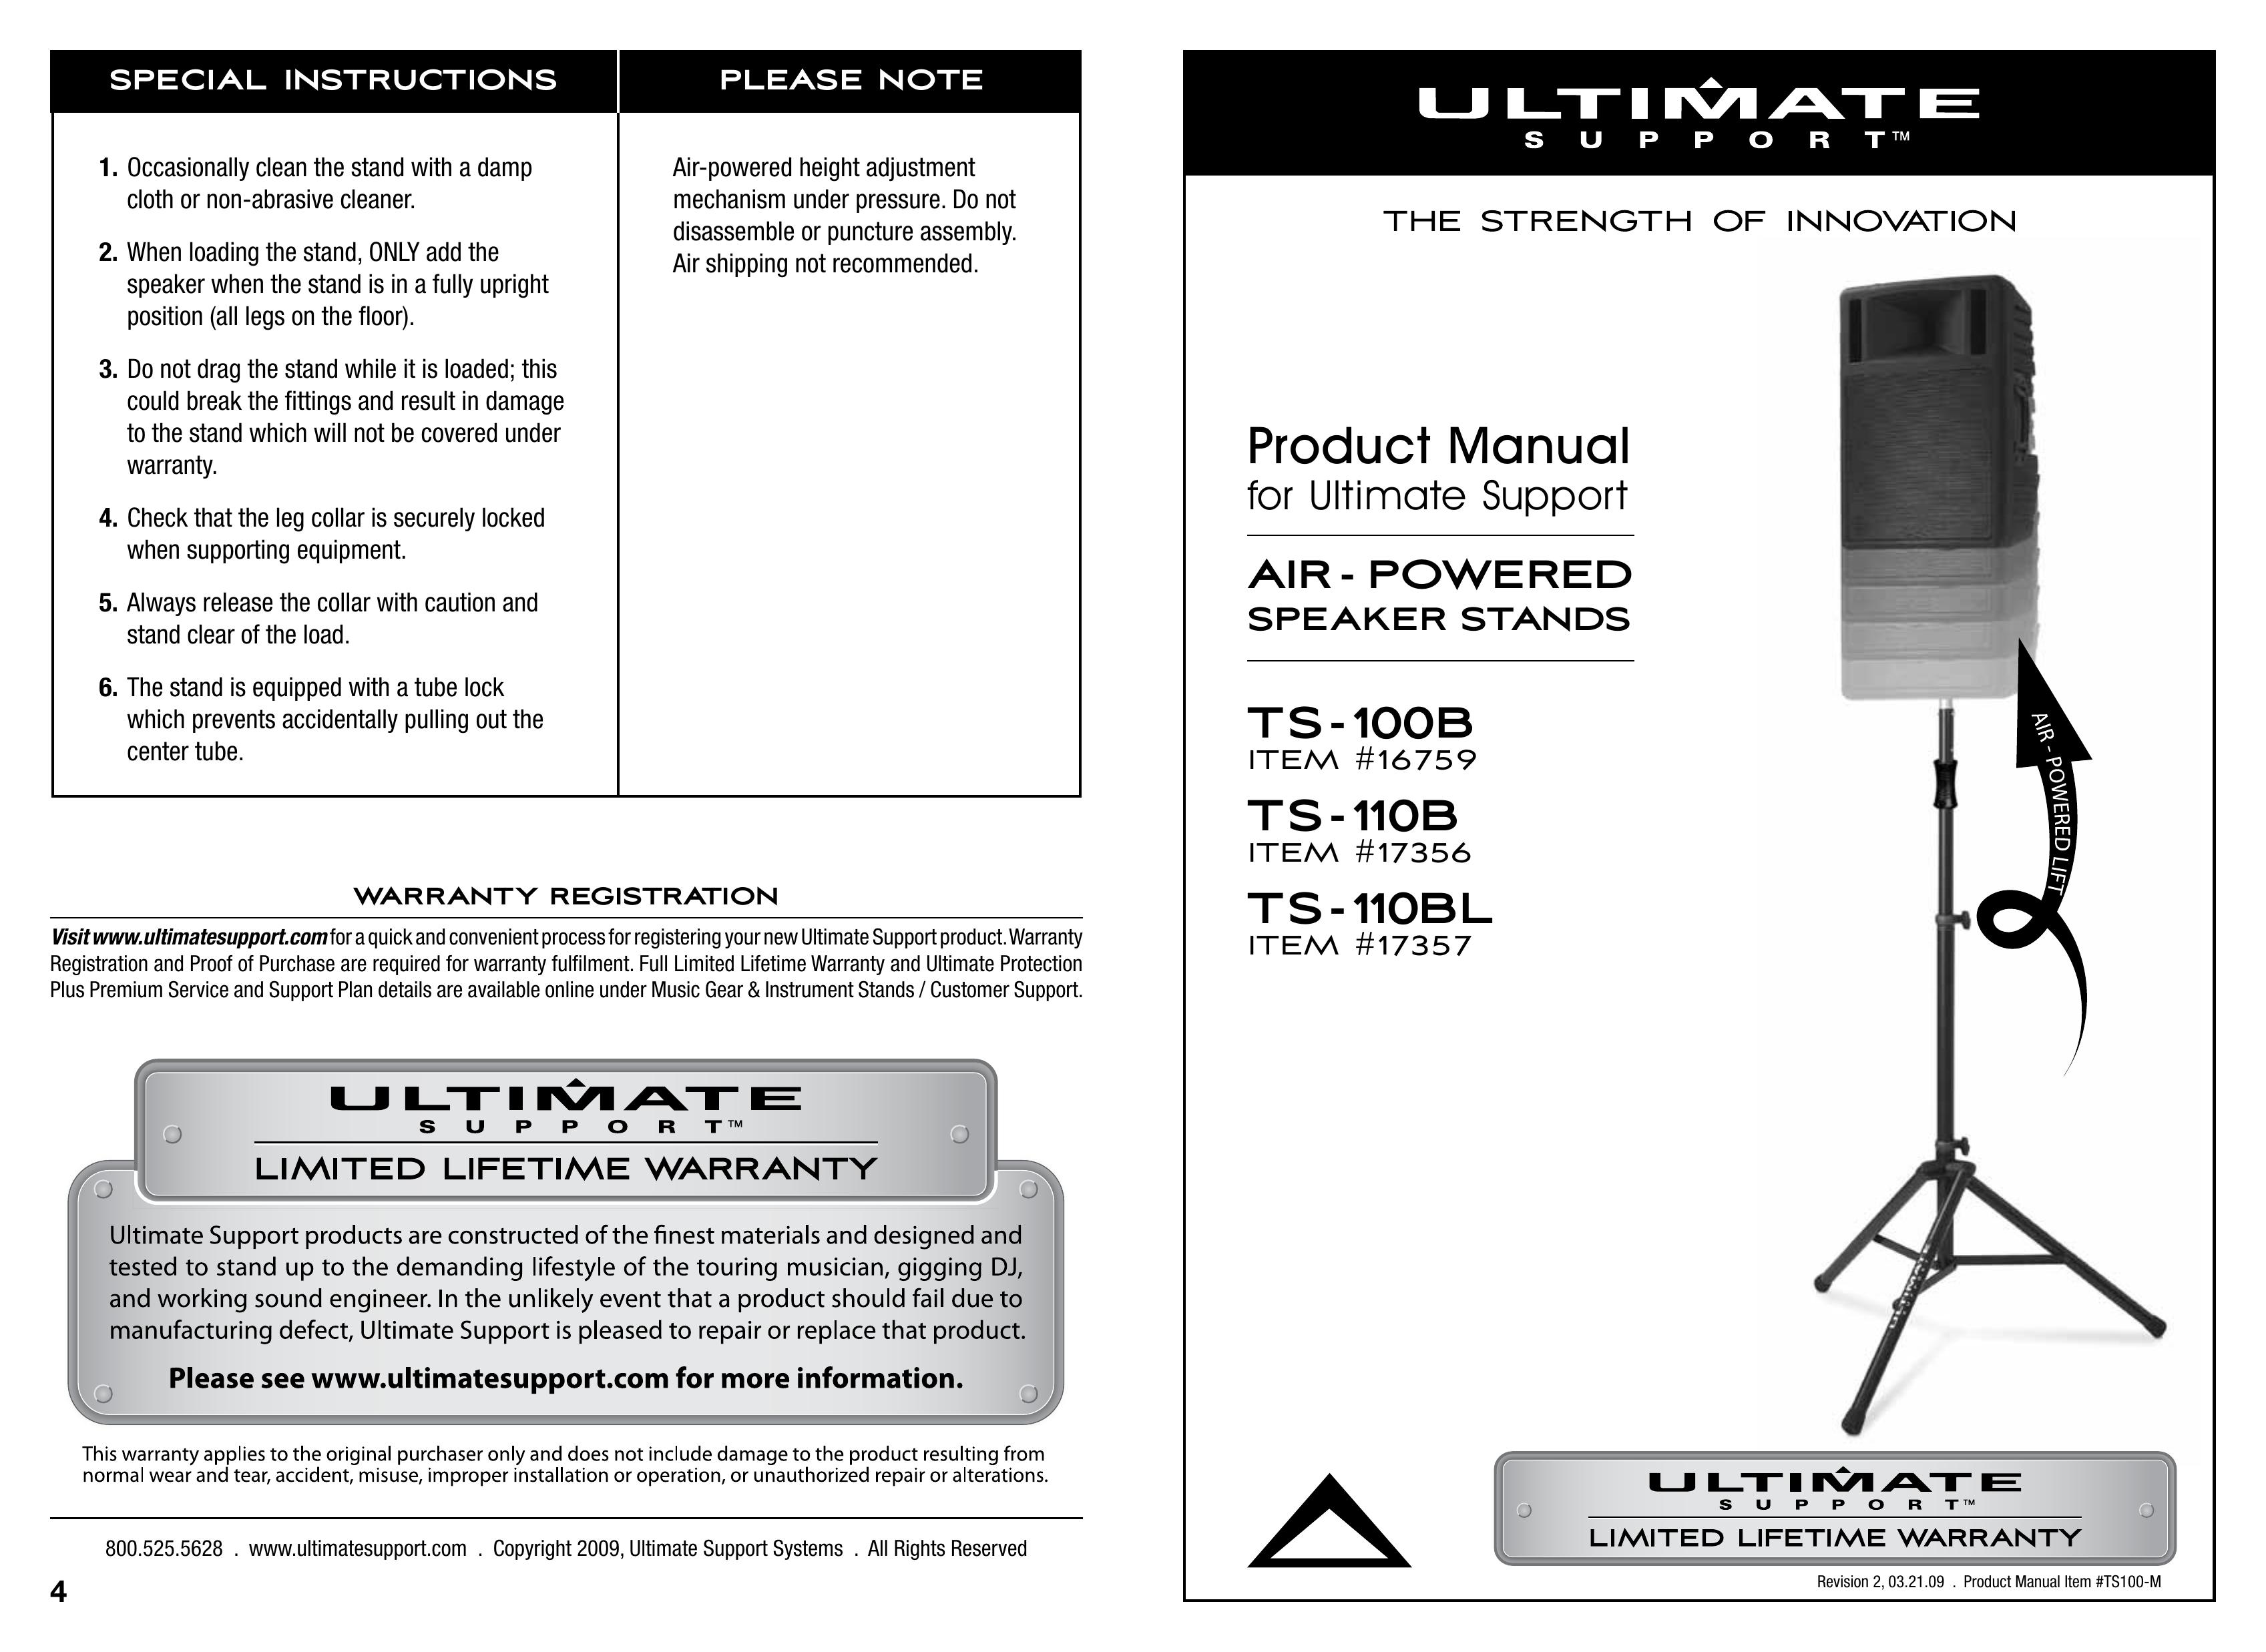 Ultimate Support Systems TS-110B Water Dispenser User Manual